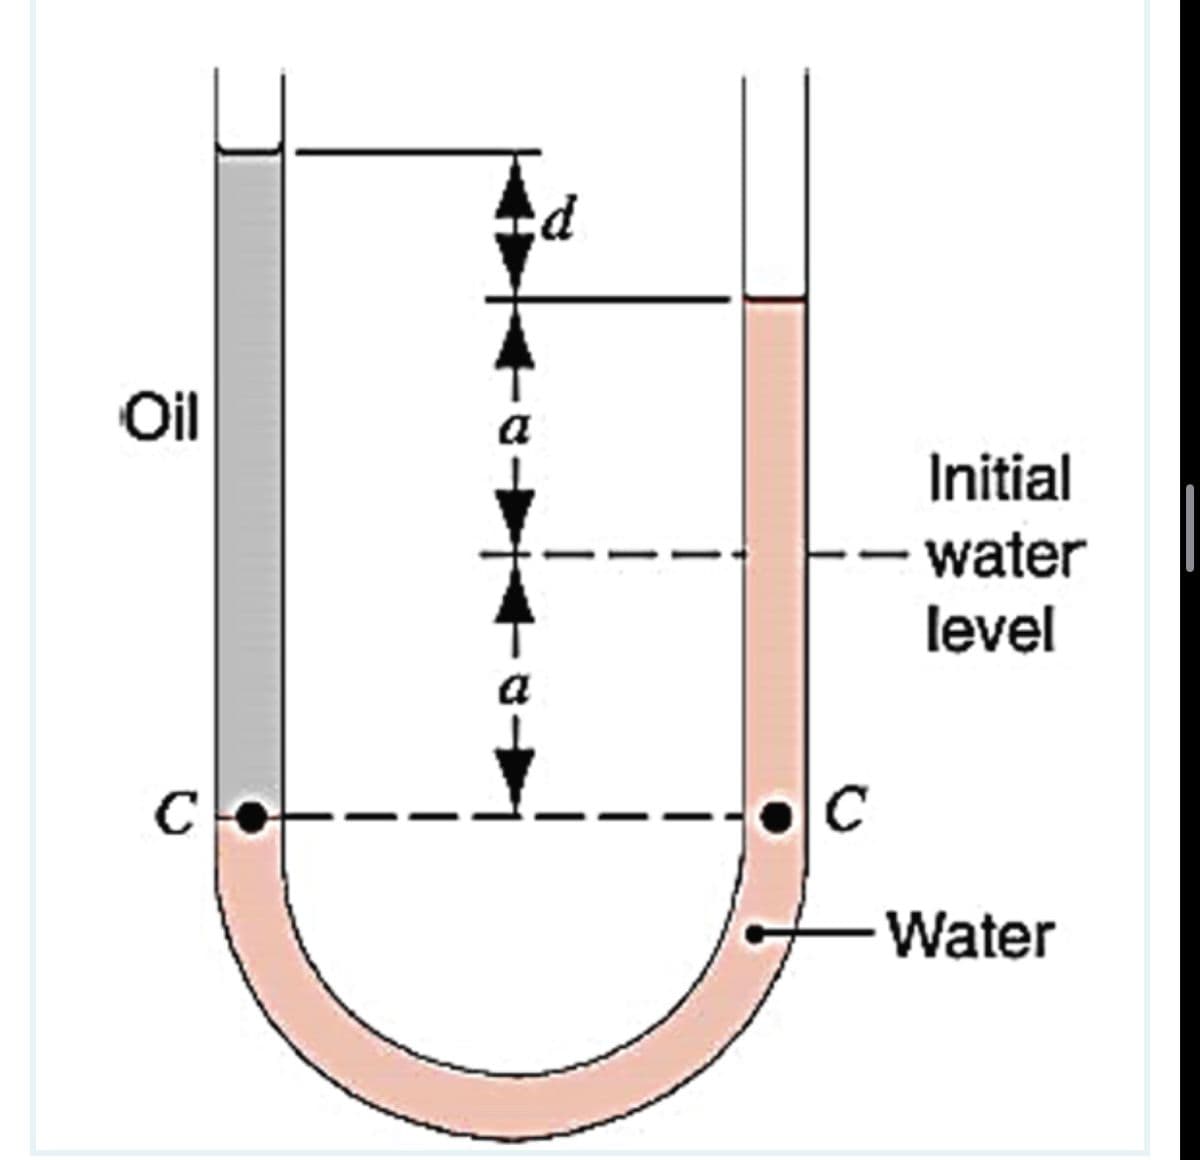 Oil
a
Initial
- water
level
C
C
Water
